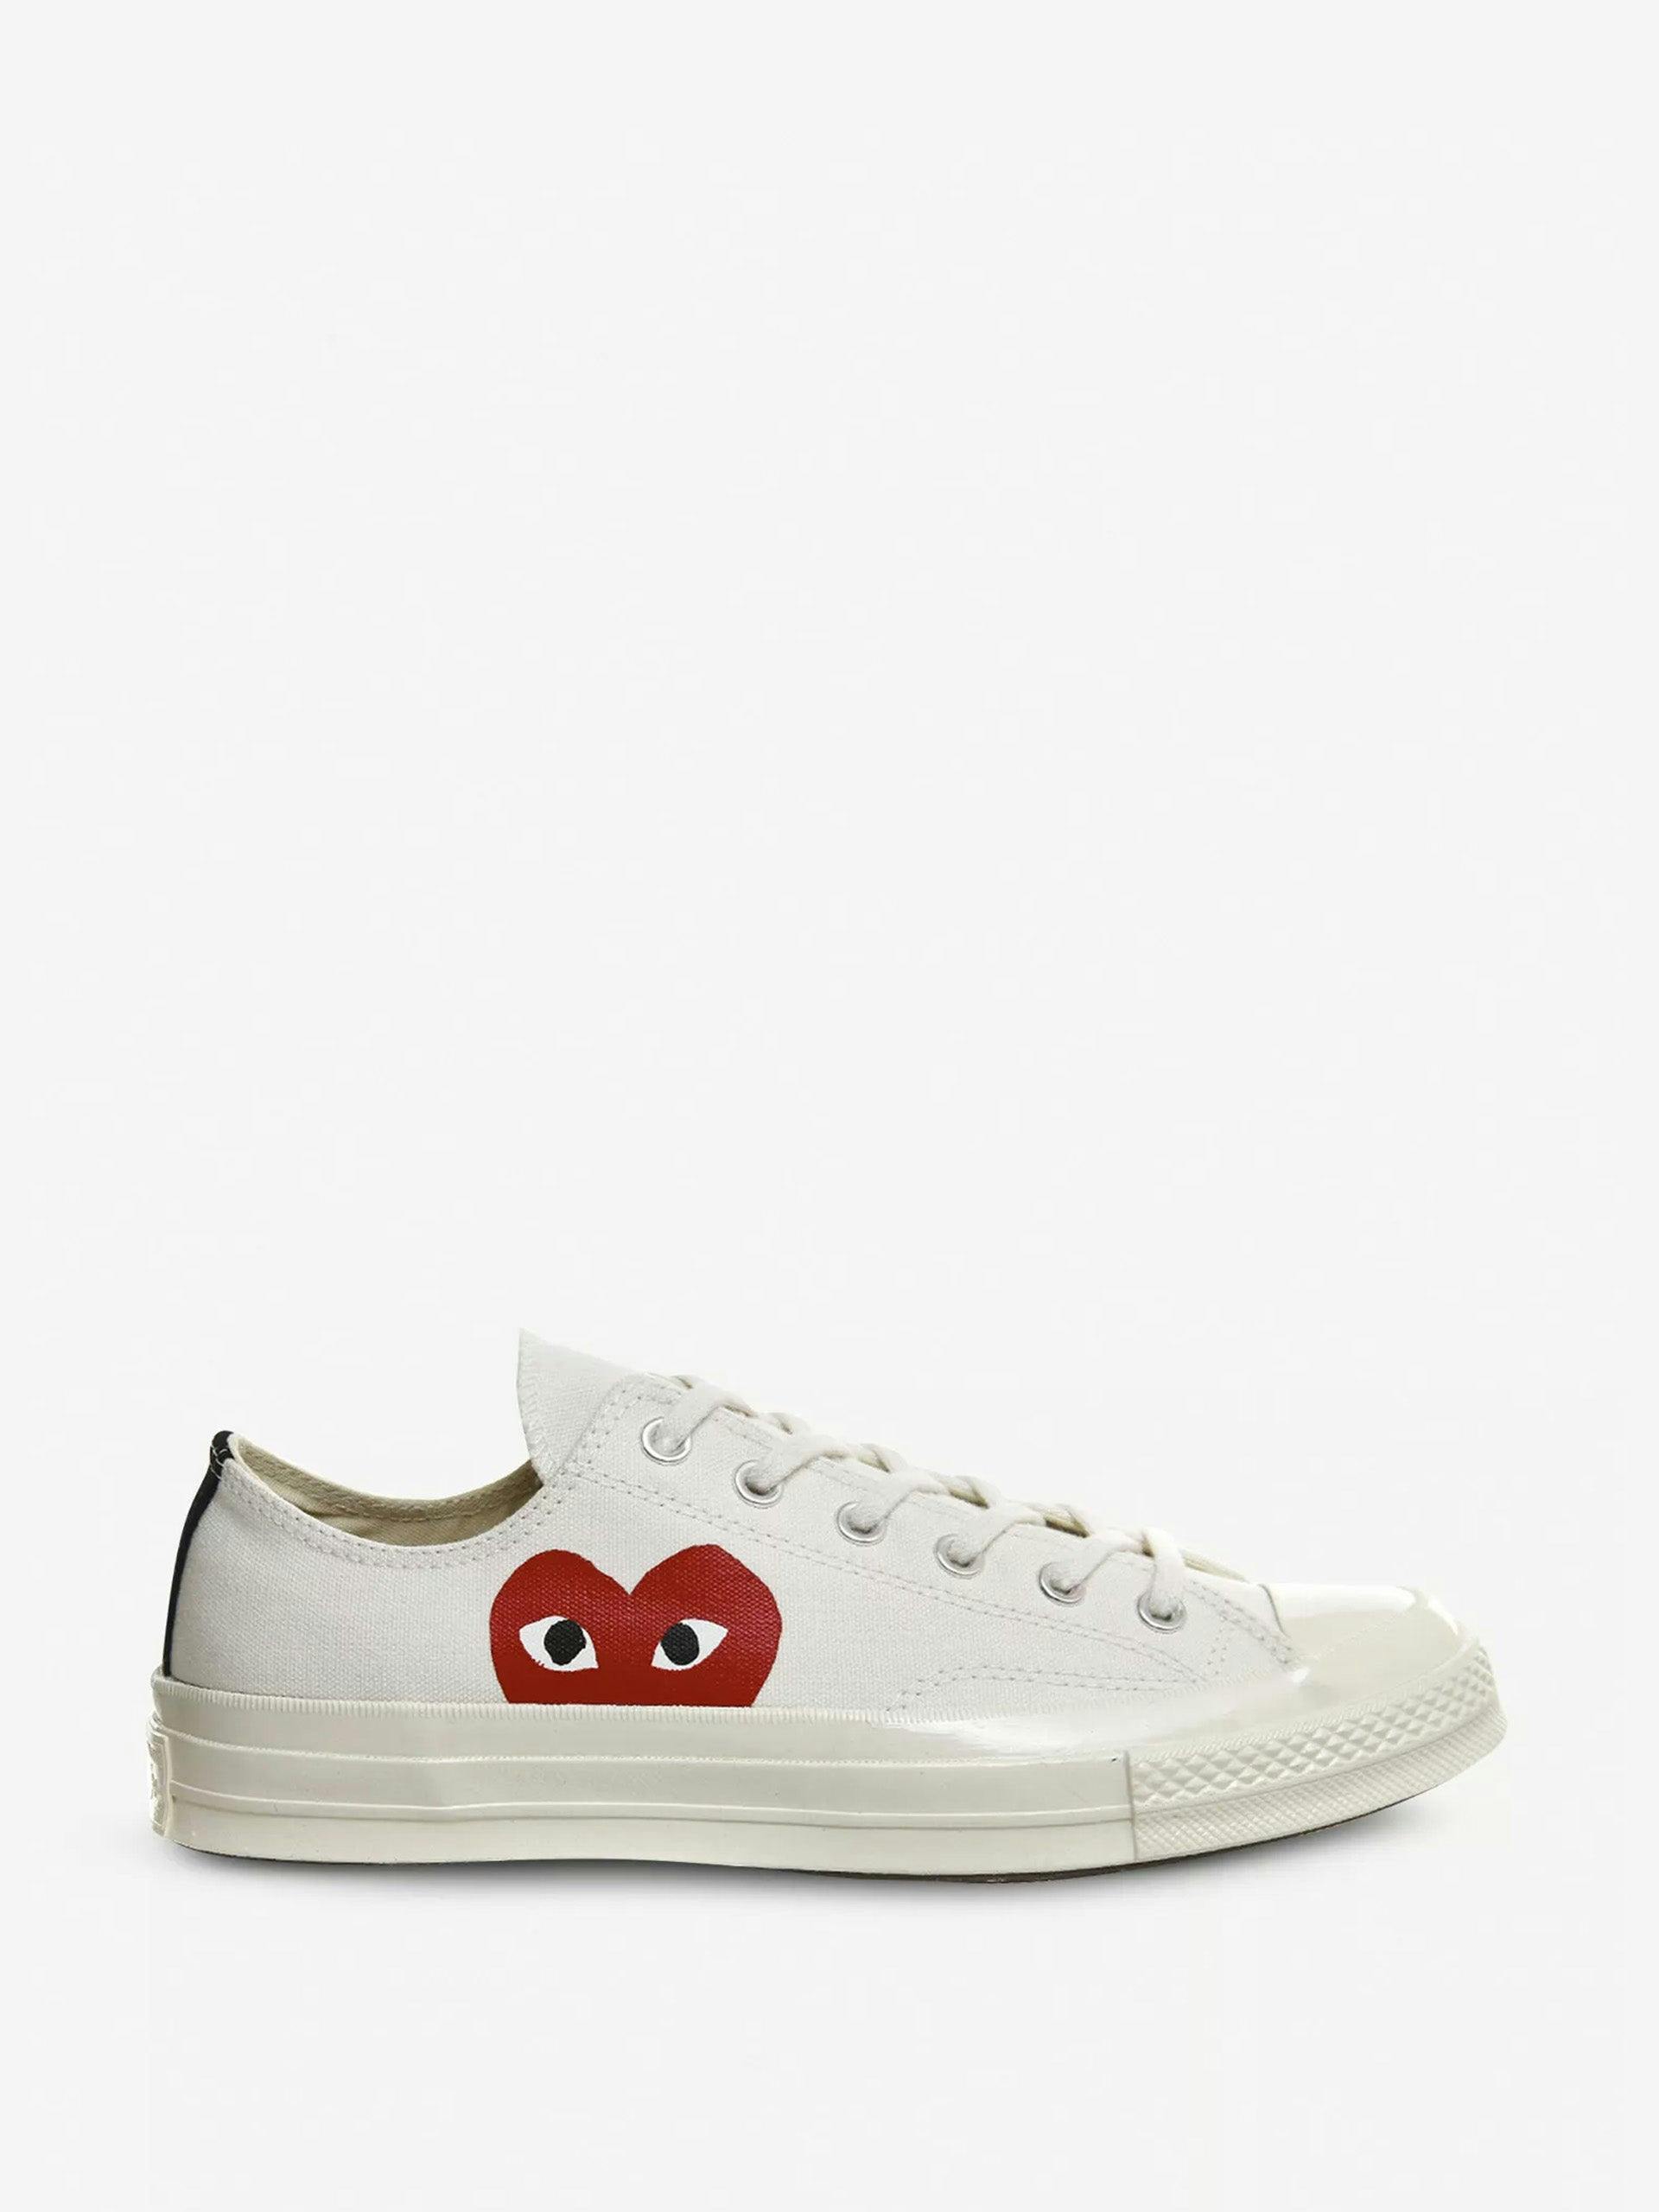 Converse 70s canvas low-top trainers